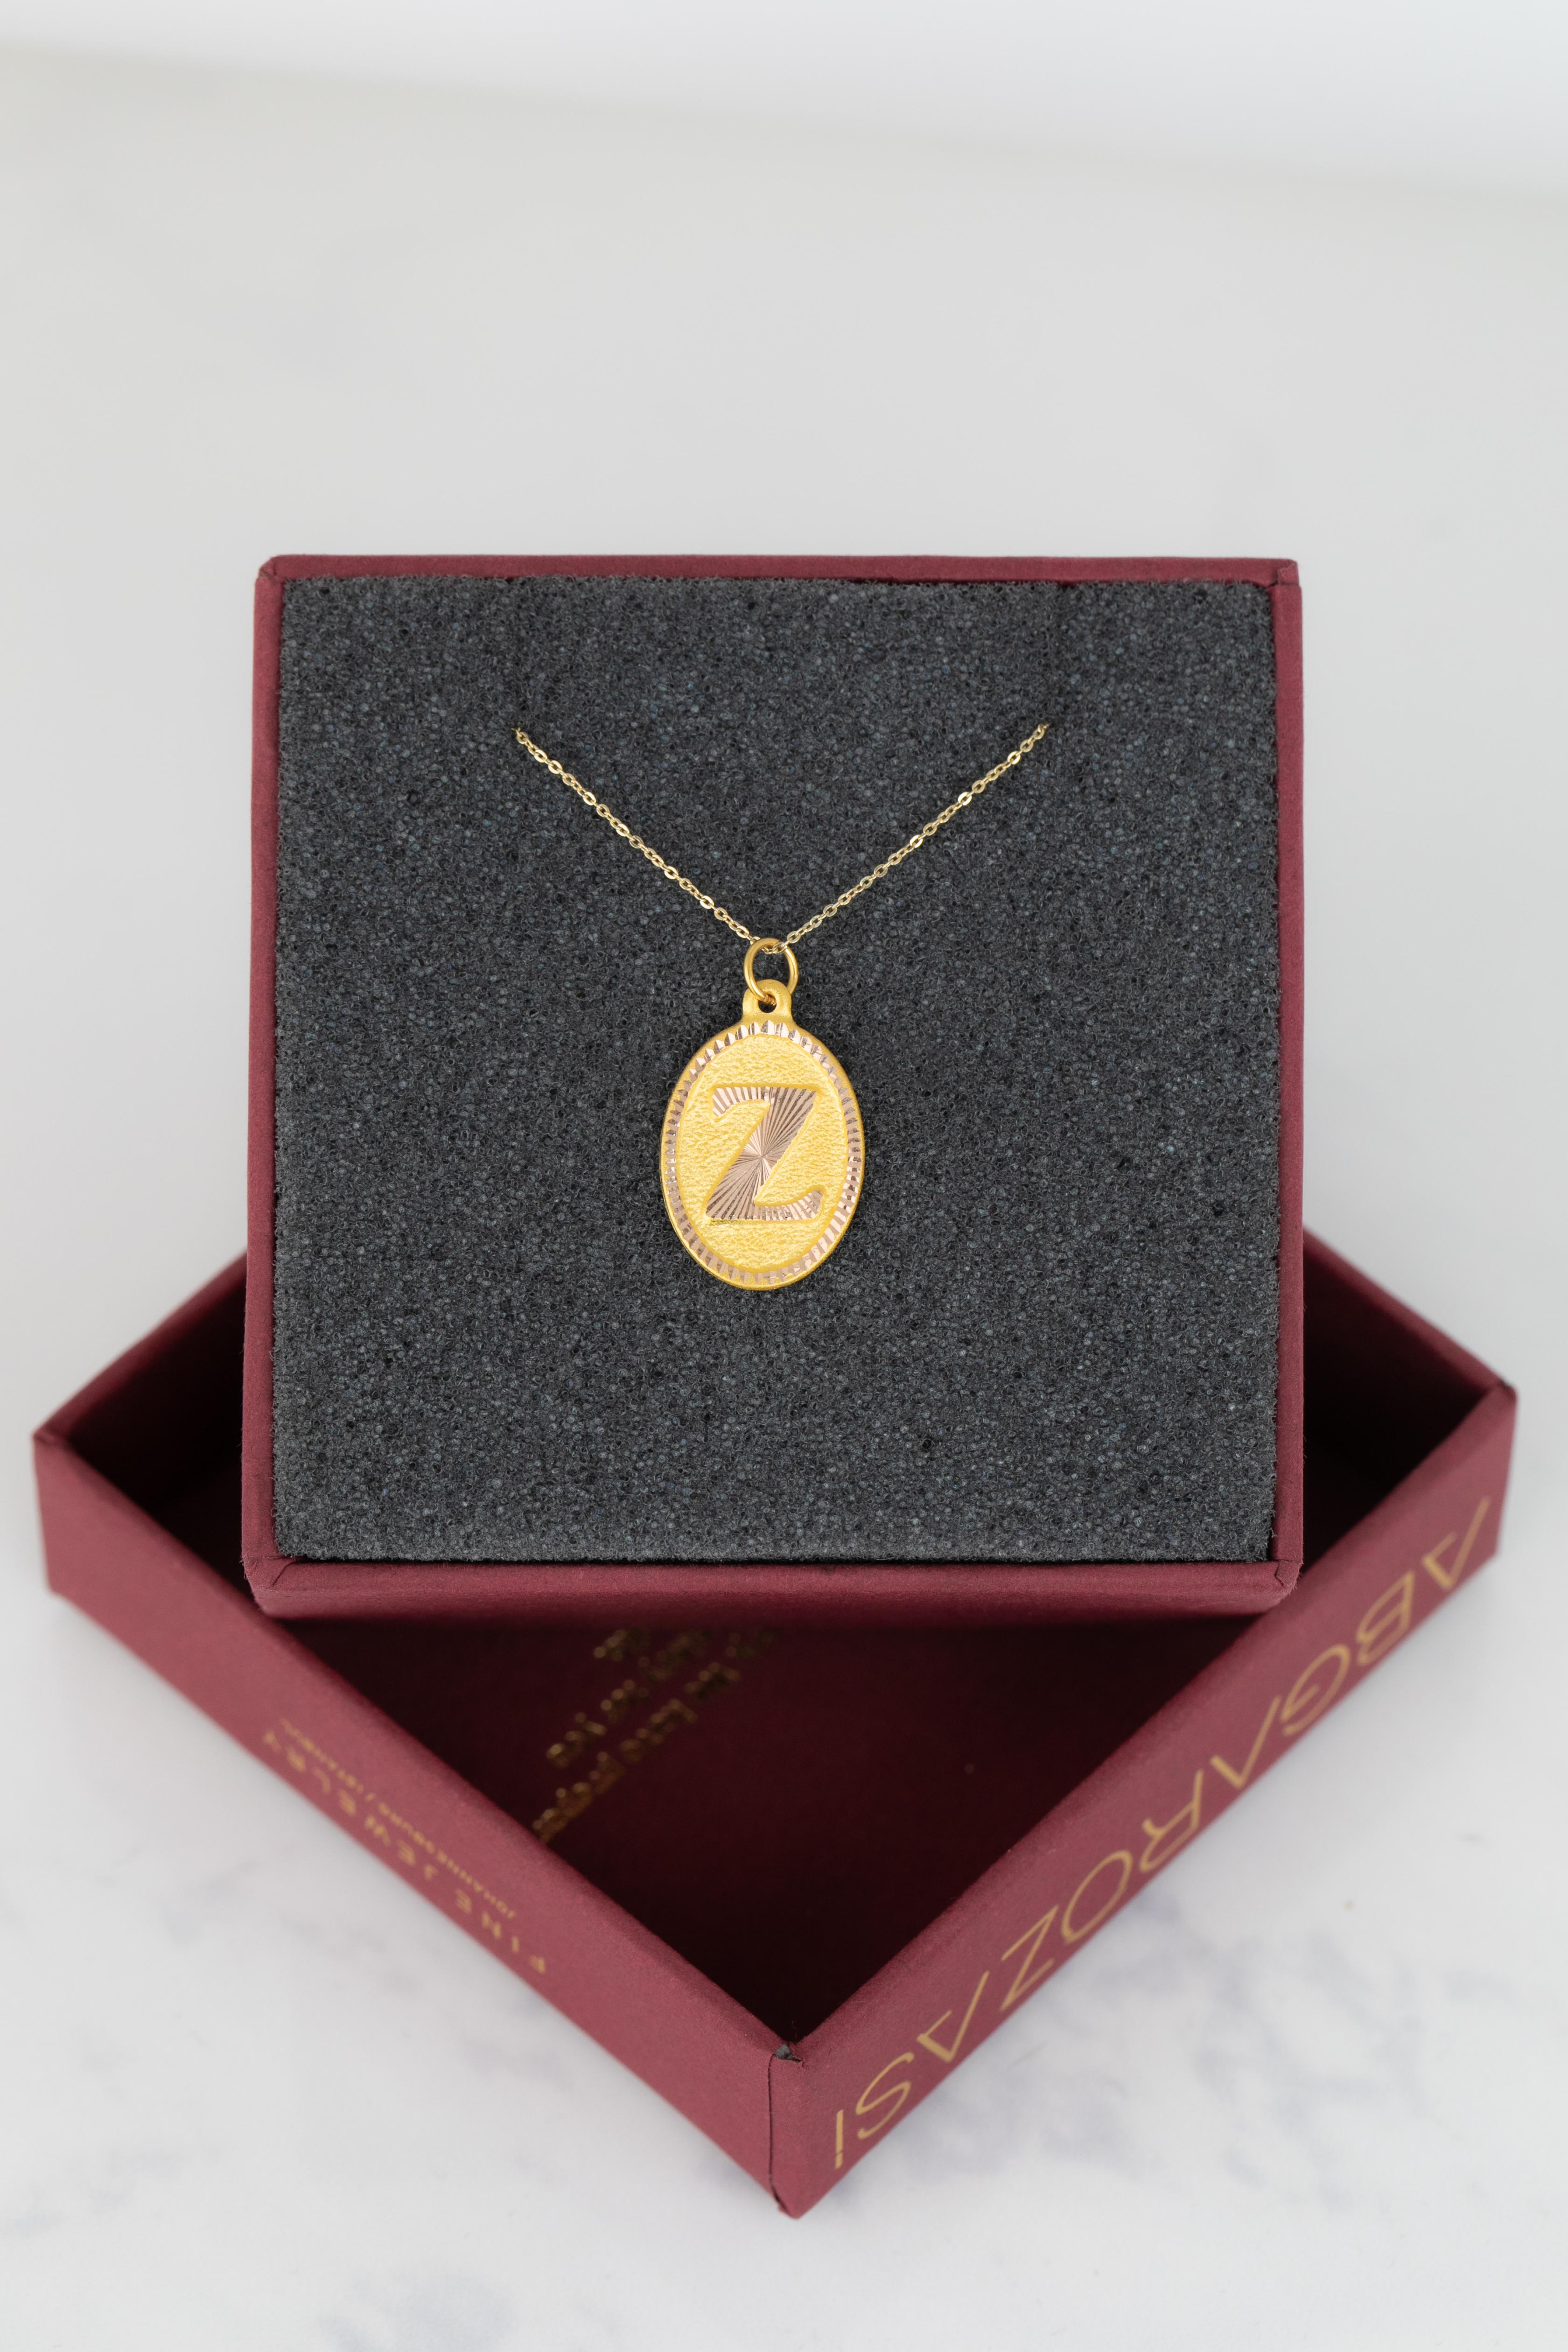 14K Gold Necklaces, Letter Necklace Models, Letter Z Gold Necklace-Gift Necklace Models, Daily Necklaces, Letter Jewelry

It's a manual labor product. 'Handmade'. Fashionable product.

This necklace was made with quality materials and excellent